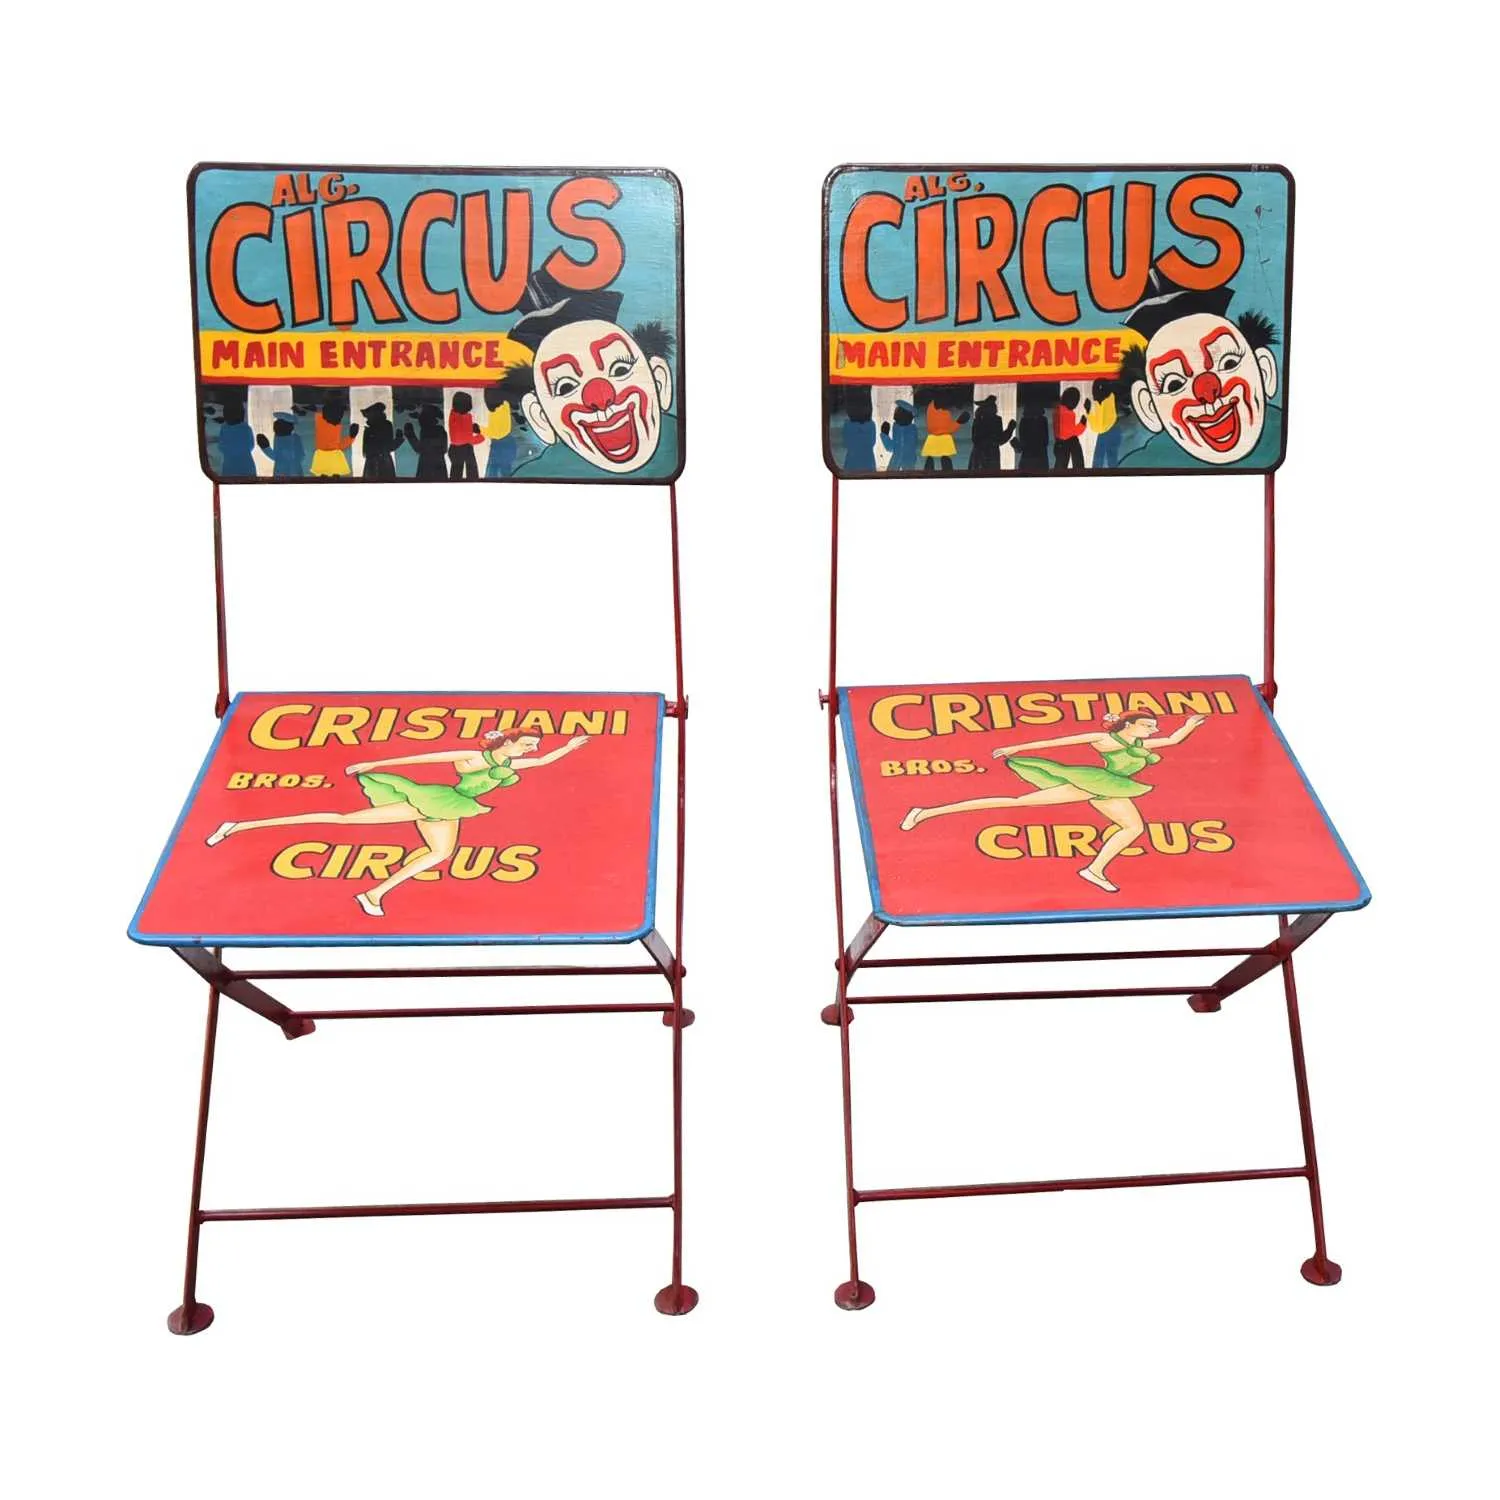 Carnival Hand Painted Multi Coloured Iron Metal Circus Folding Chair